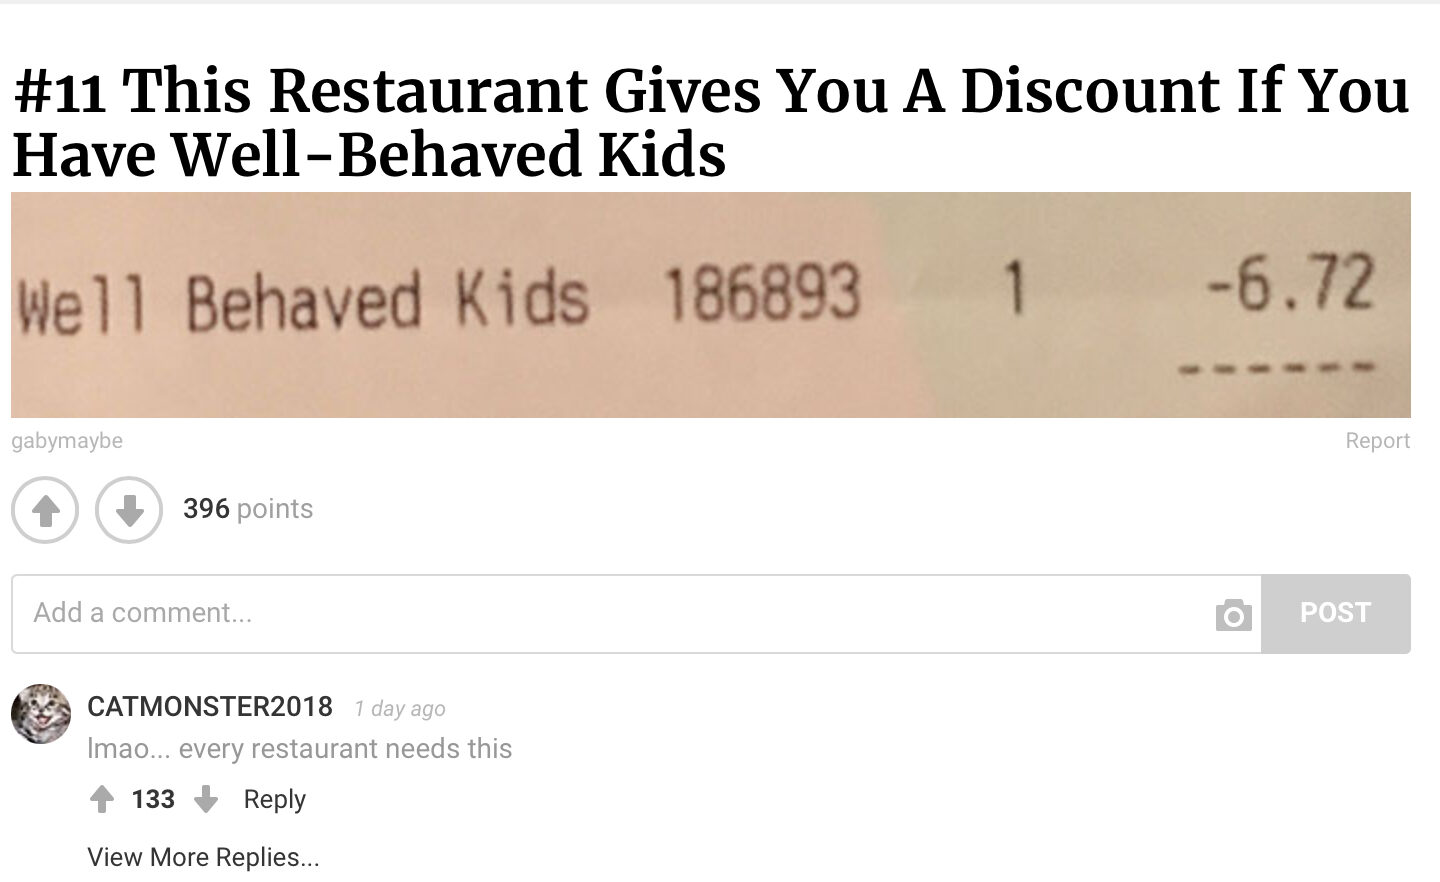 Restaurant Gives A Discount If You Have Well-Behaved Kids